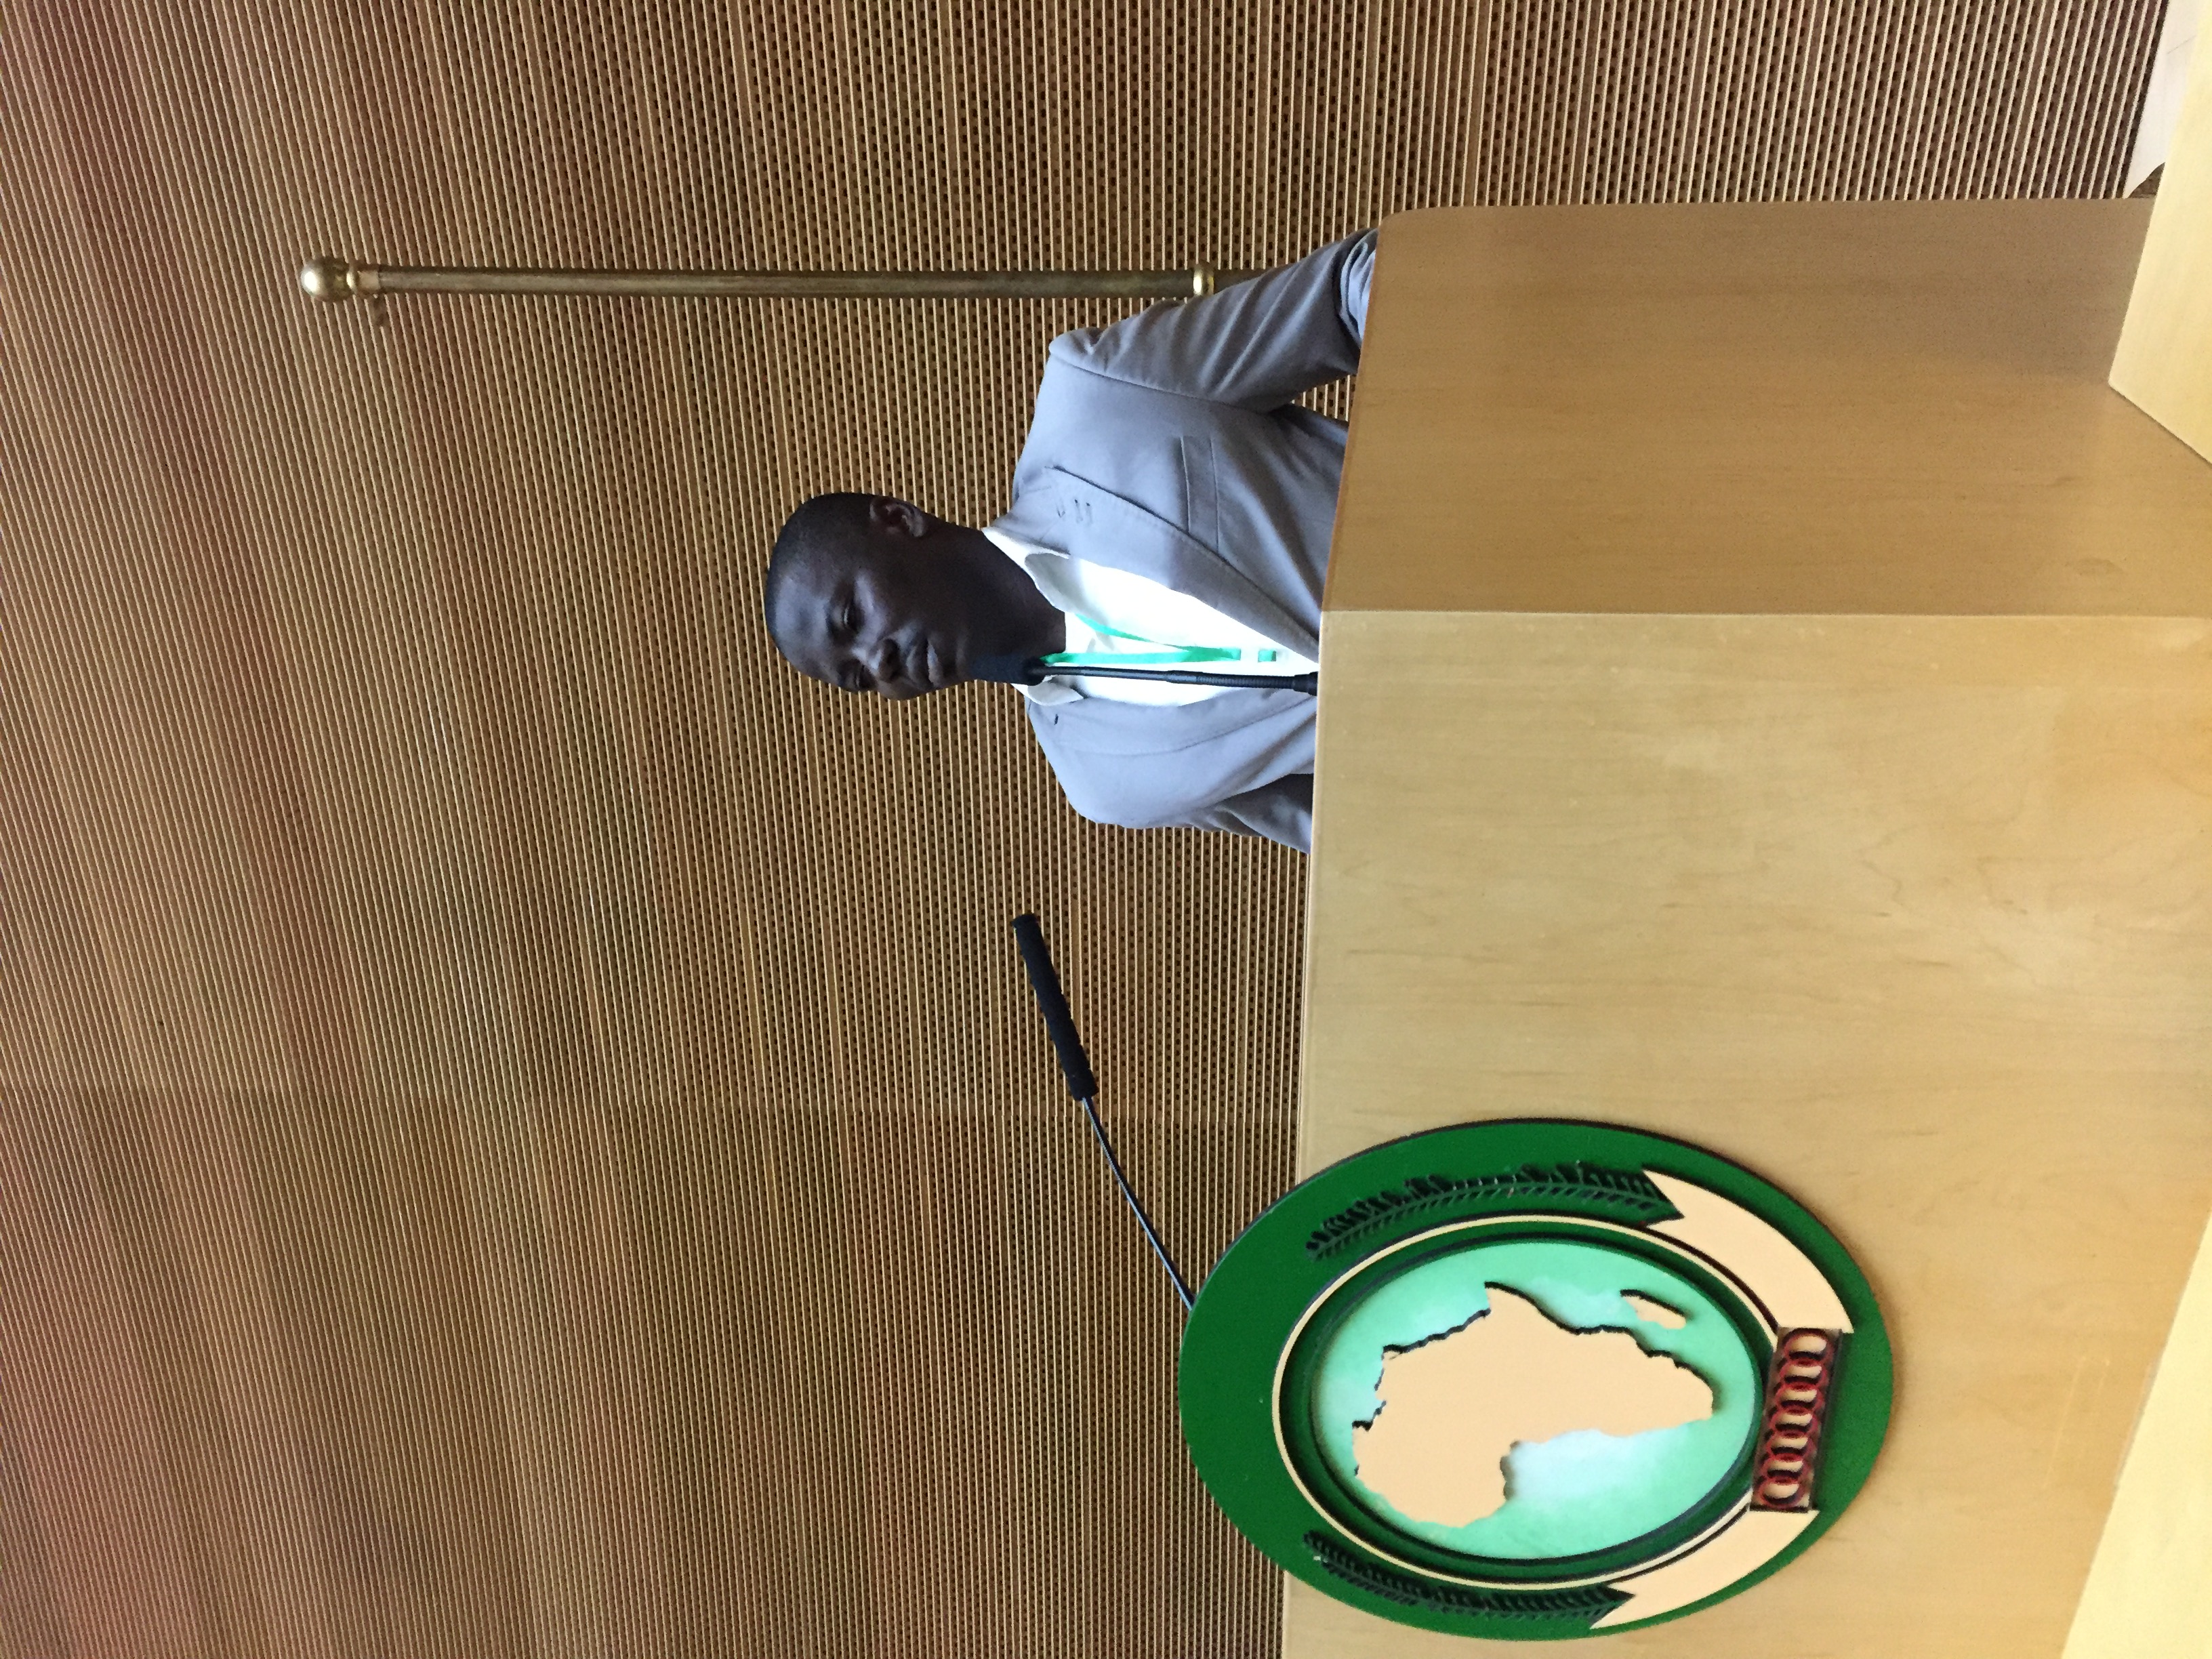 Joseph Akowuah at the African Union